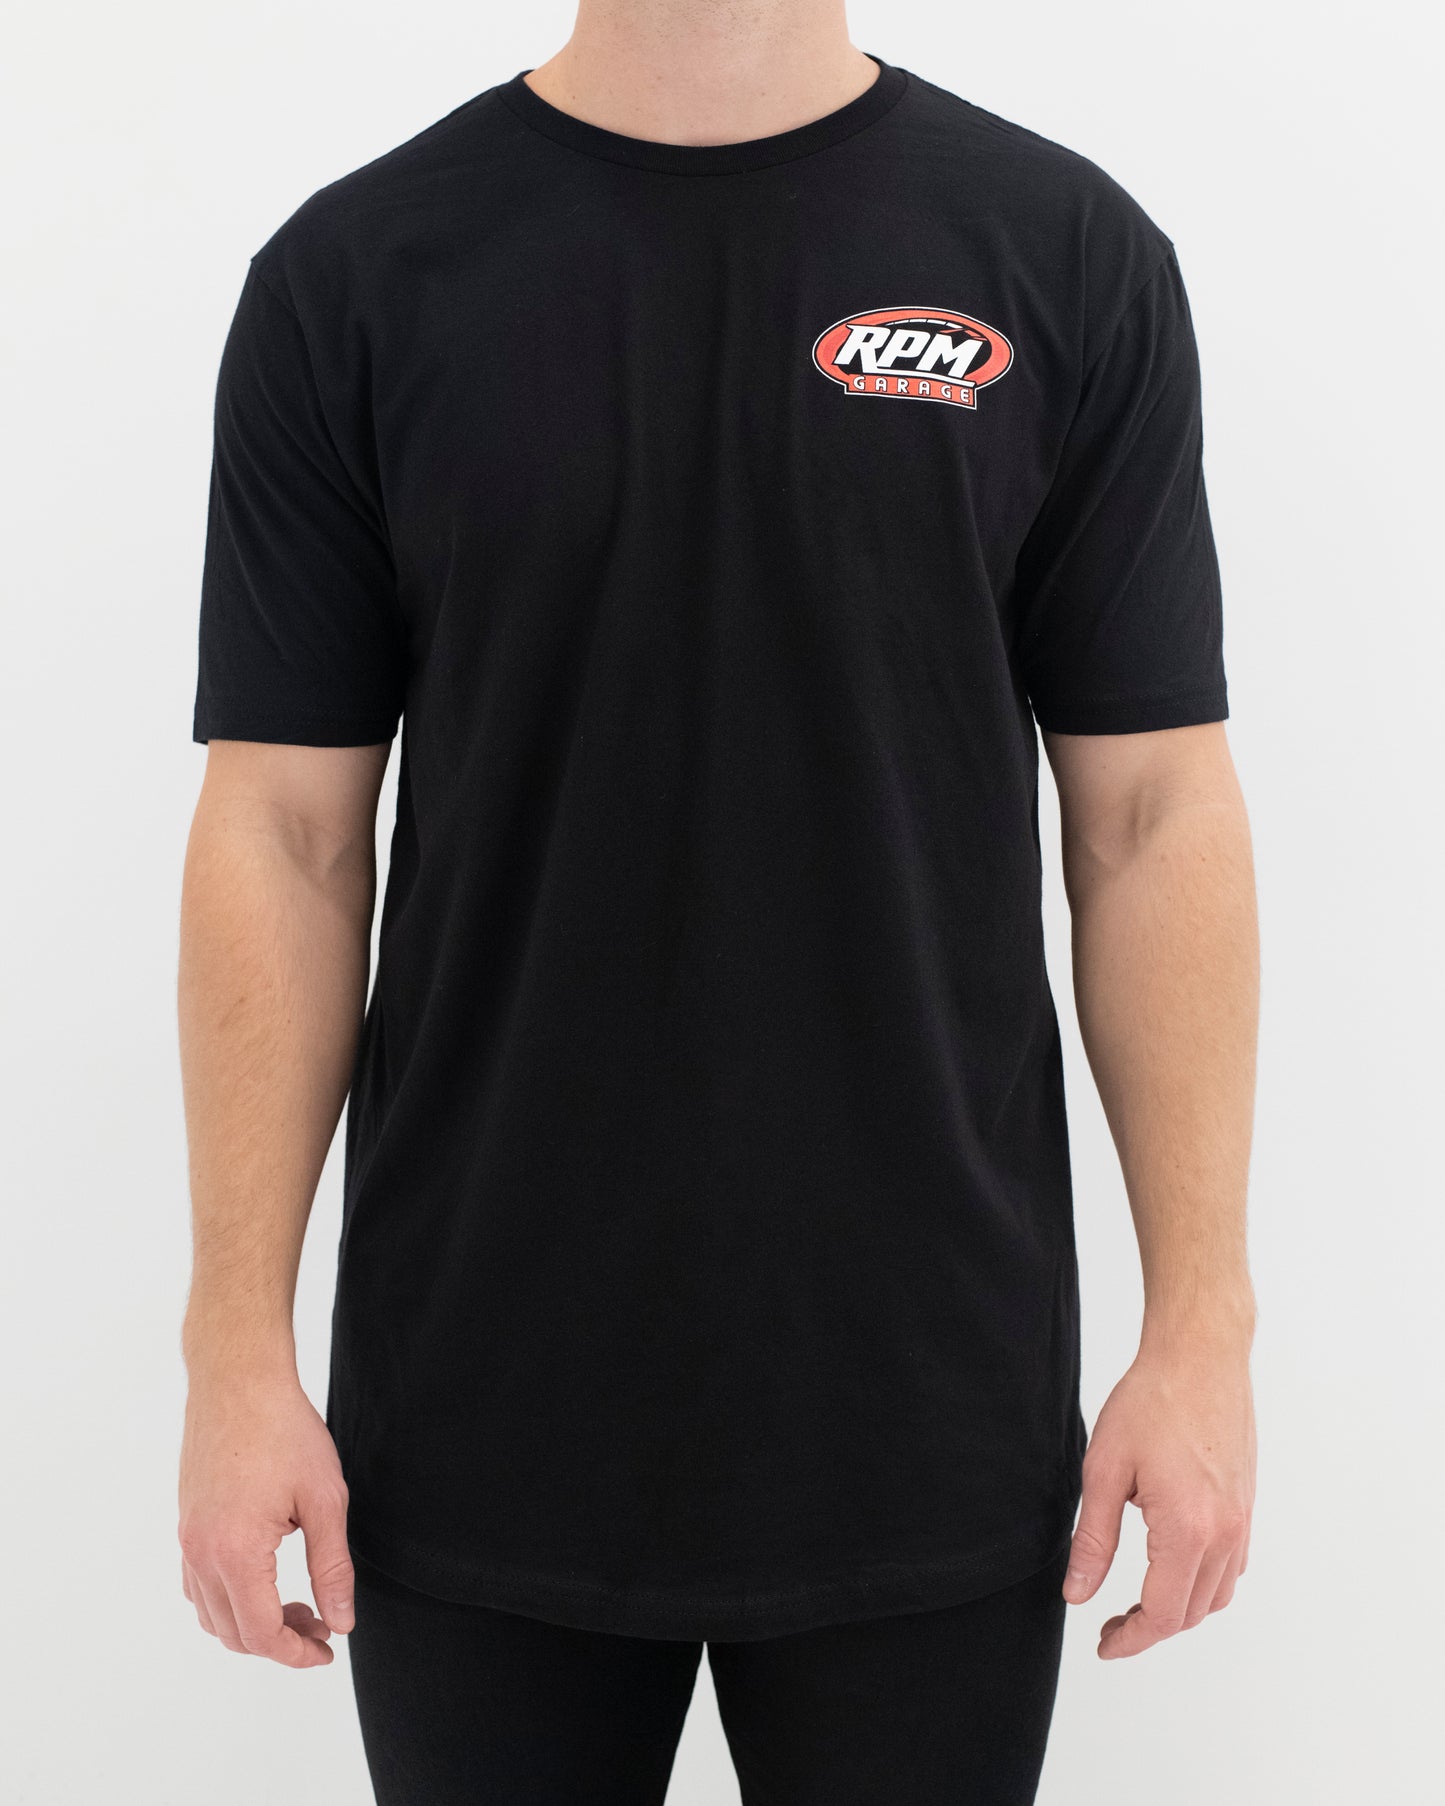 The GT3 Cup Long Tee